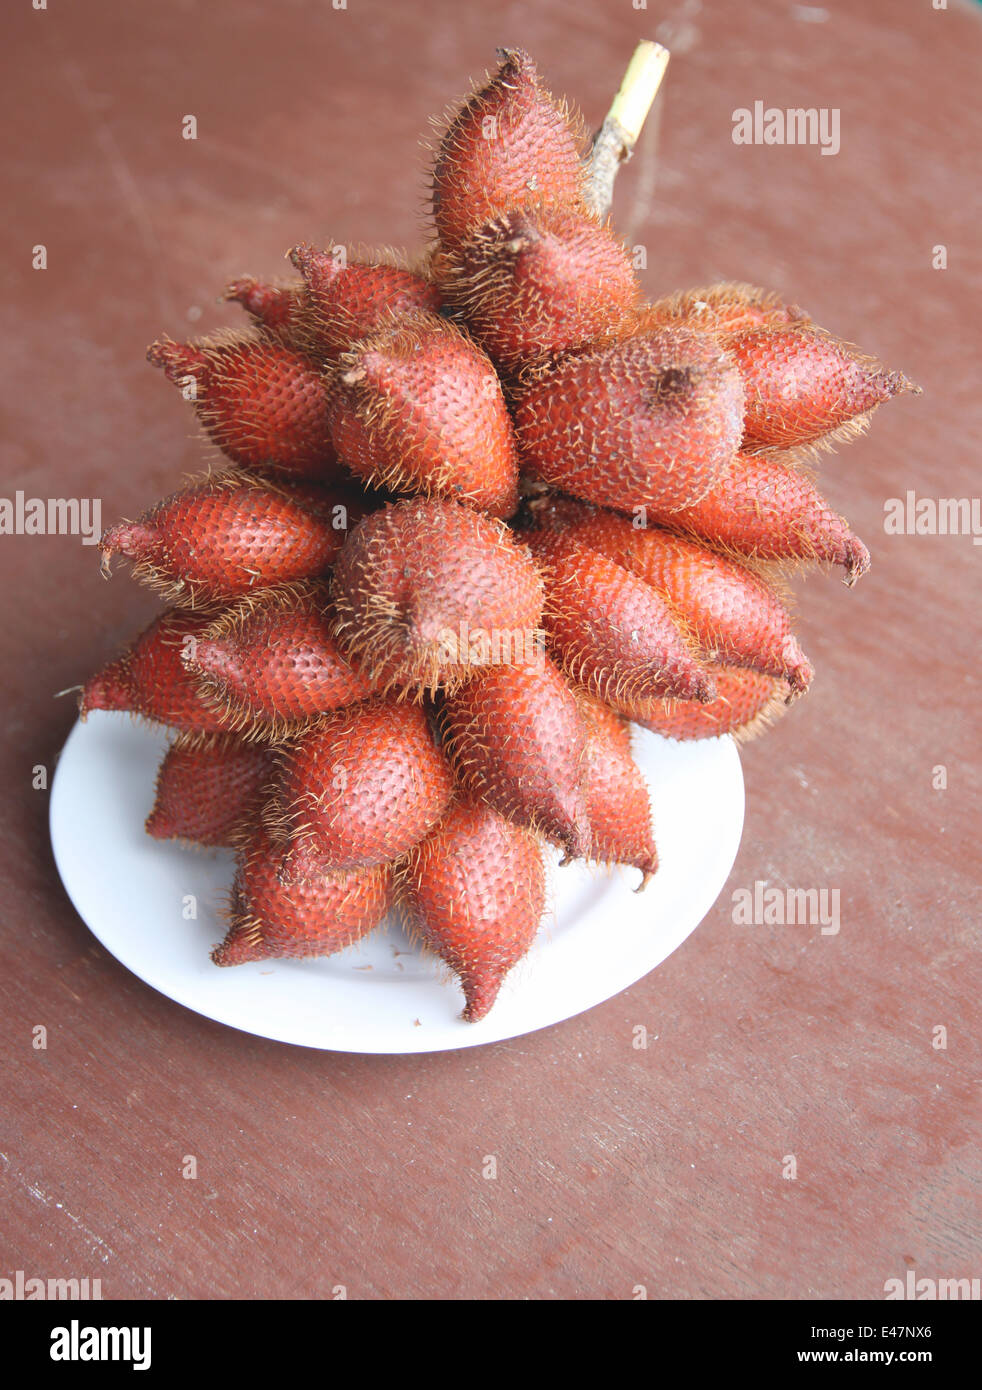 Fresh salacca edulis salak palm fruit in dish on the foods table. Stock Photo